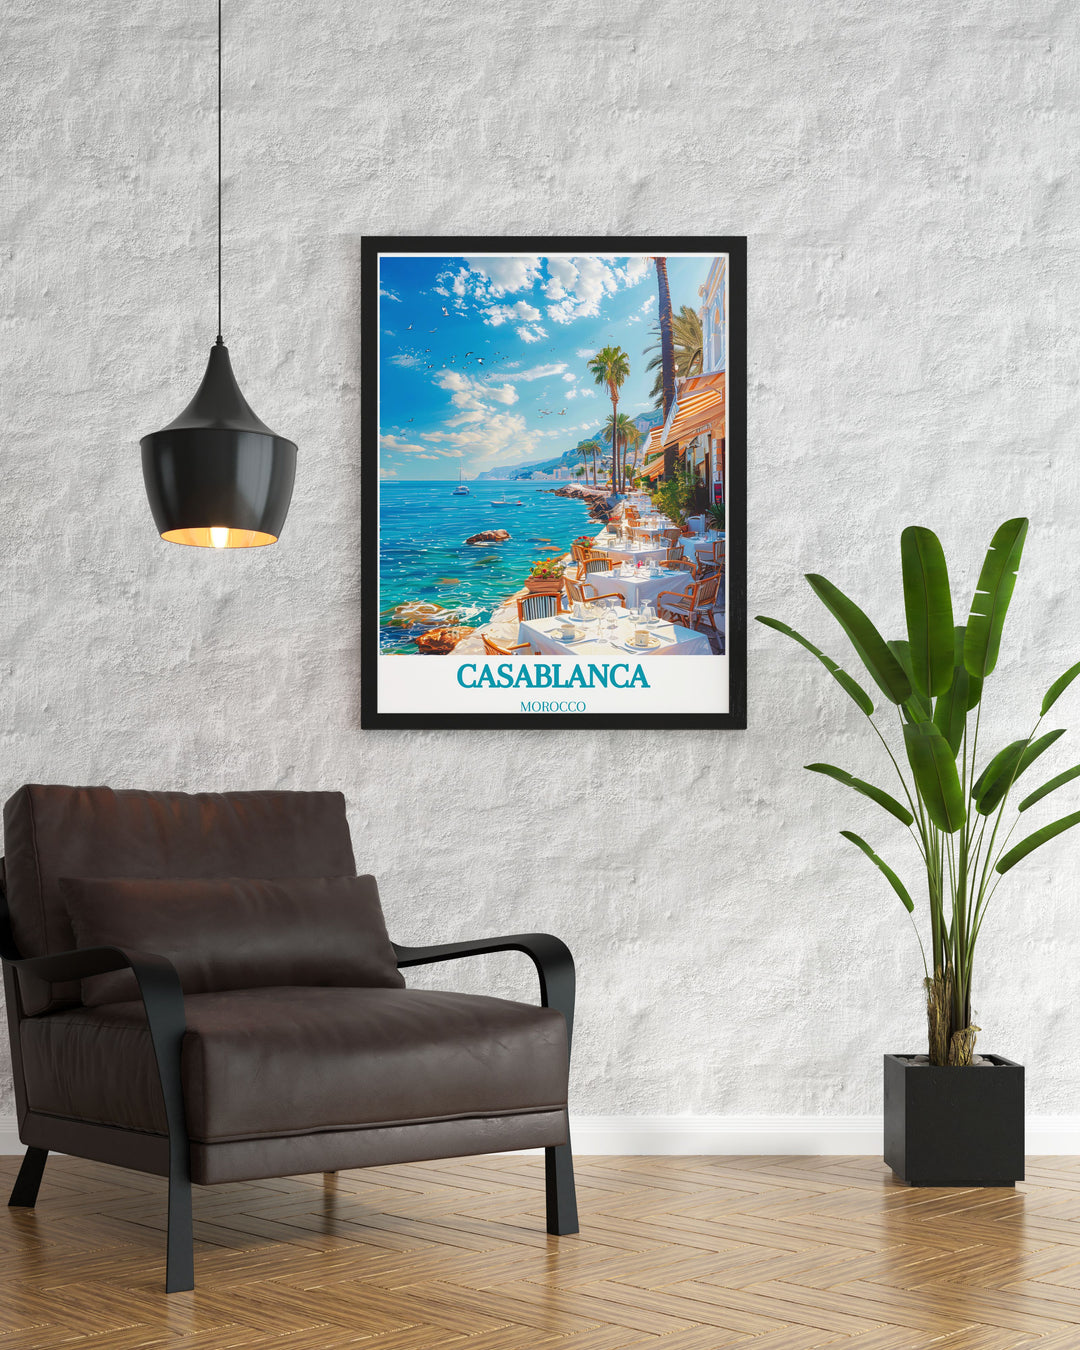 This poster artfully depicts Corniche Ain Diab and its role as a scenic landmark in Casablanca, offering a perfect blend of seaside beauty and urban landscapes for your decor.